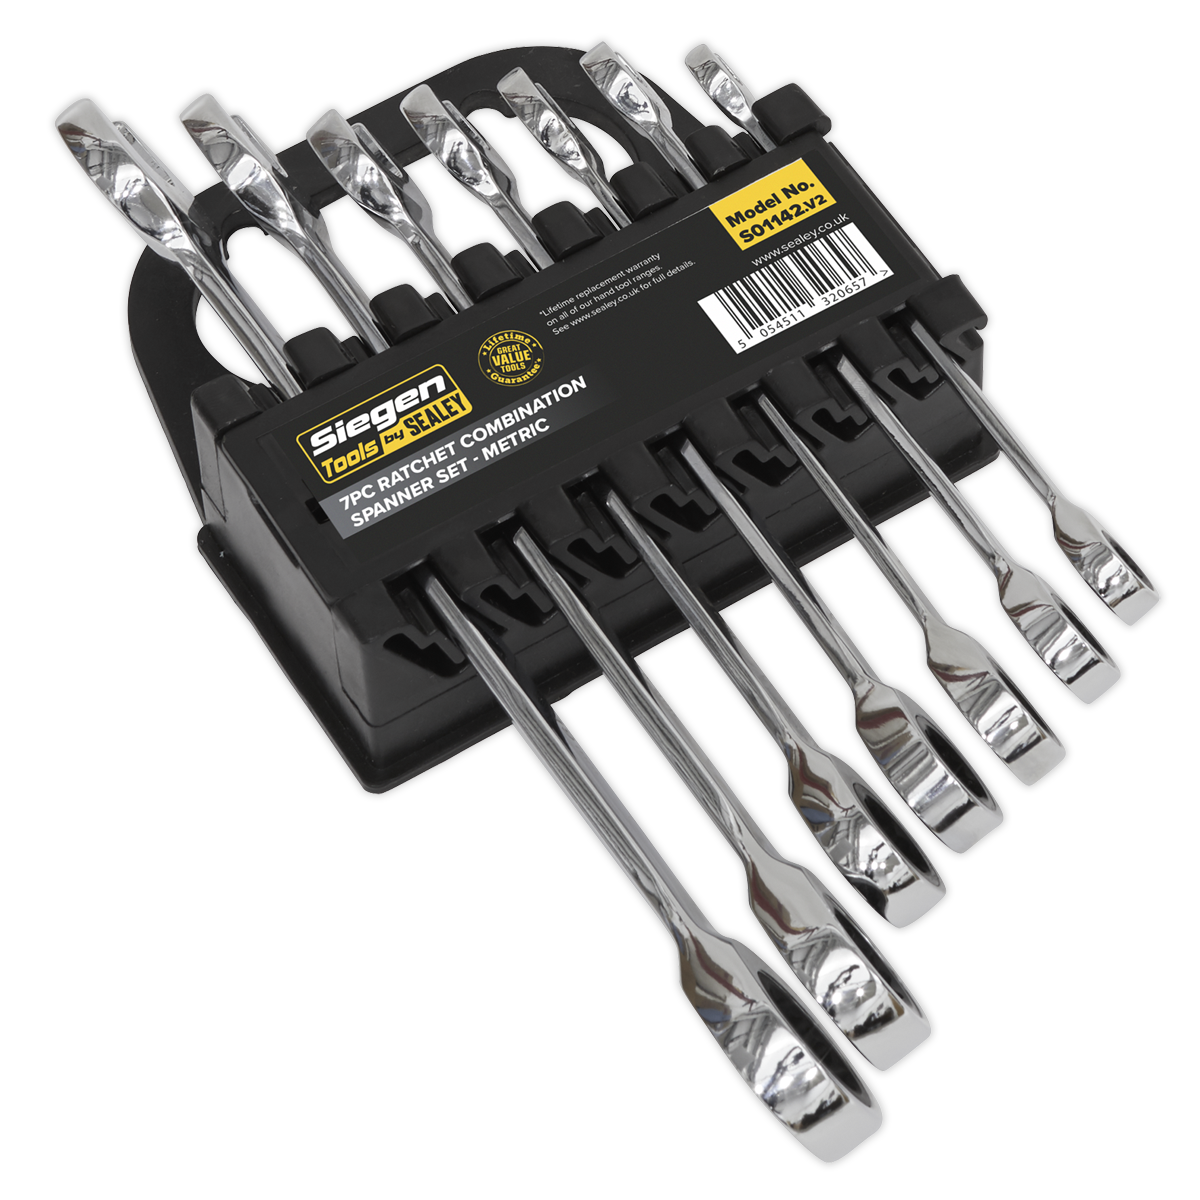 Sealey 7pc combination ratchet spanner set S01142 |  Chrome Vanadium steel ratchet combination spanner set. | toolforce.ie